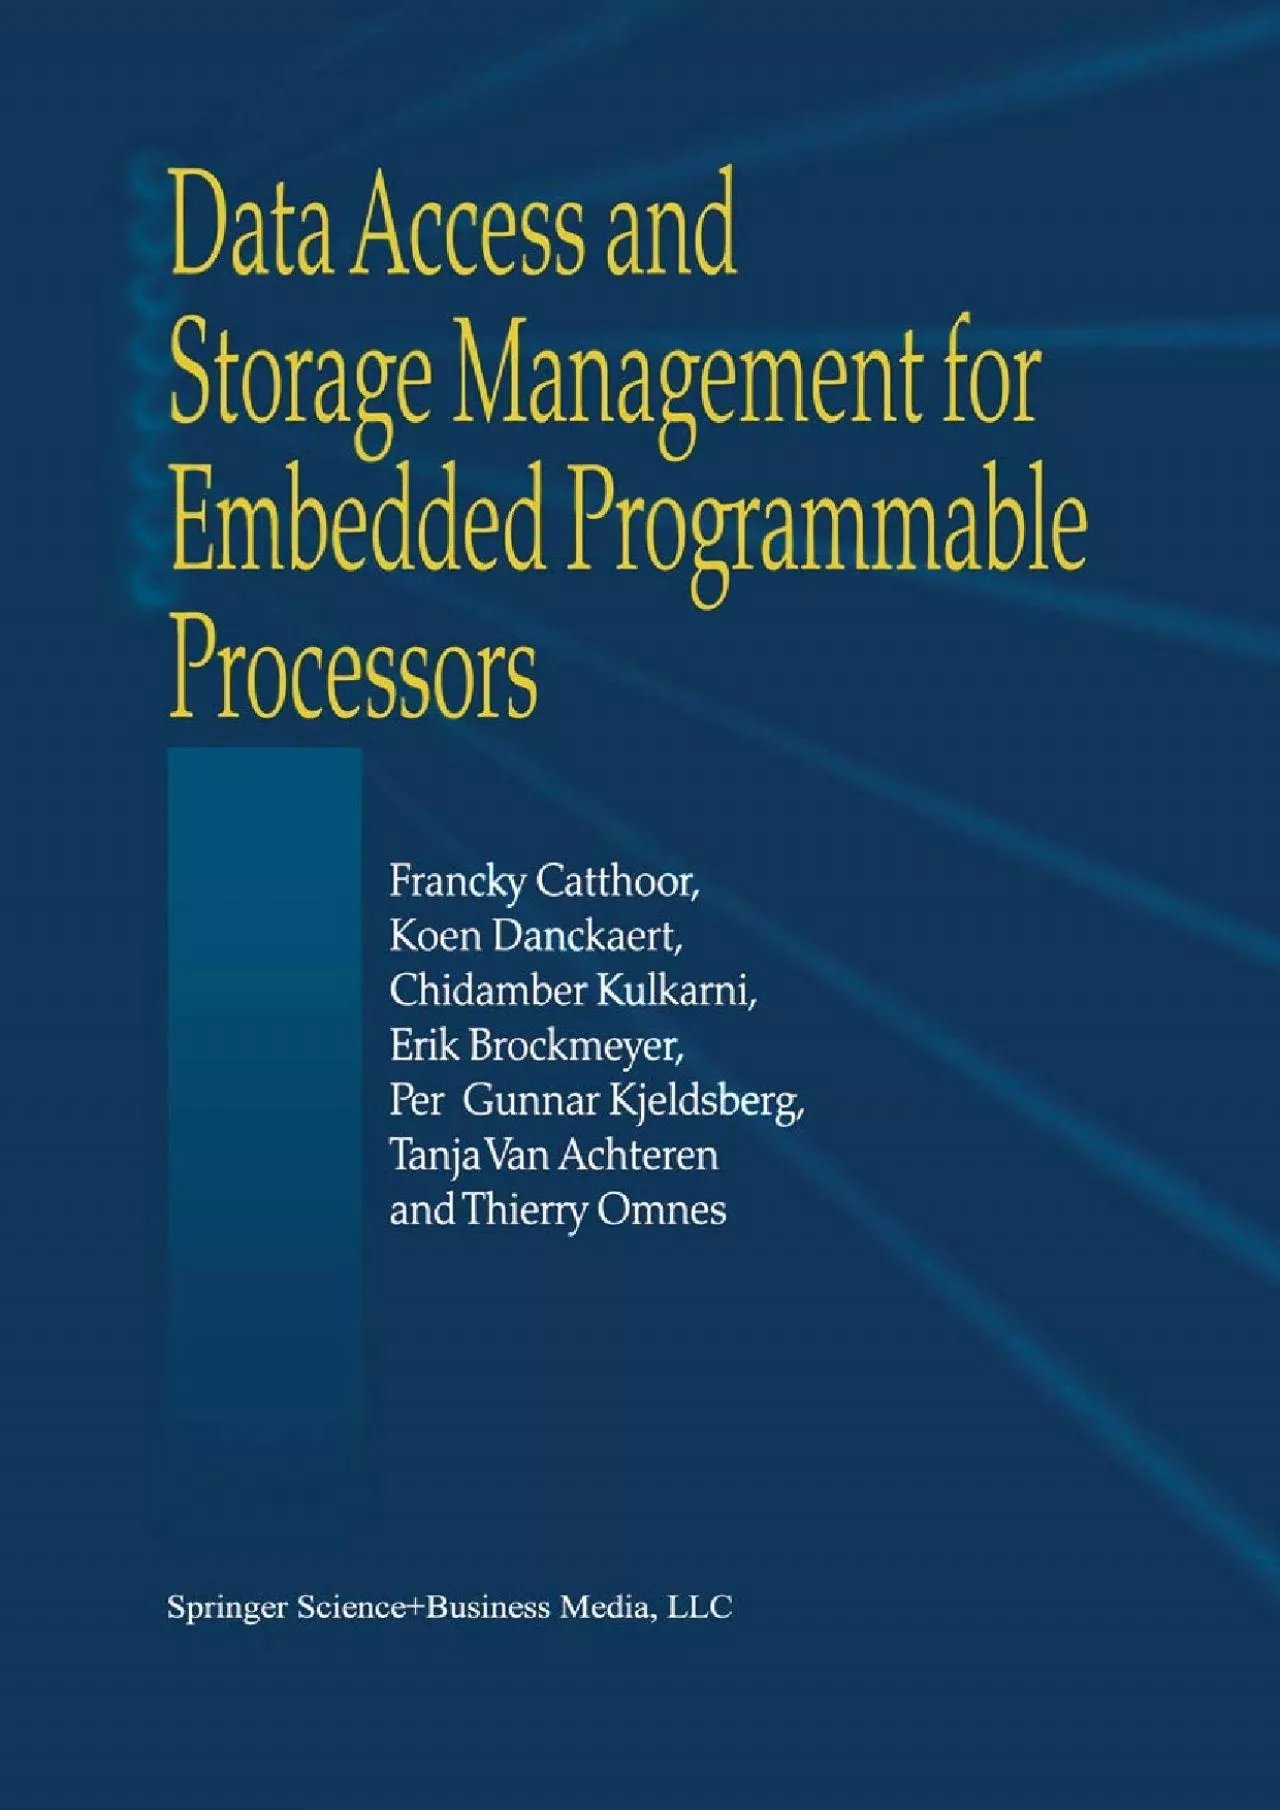 [READING BOOK]-Data Access and Storage Management for Embedded Programmable Processors